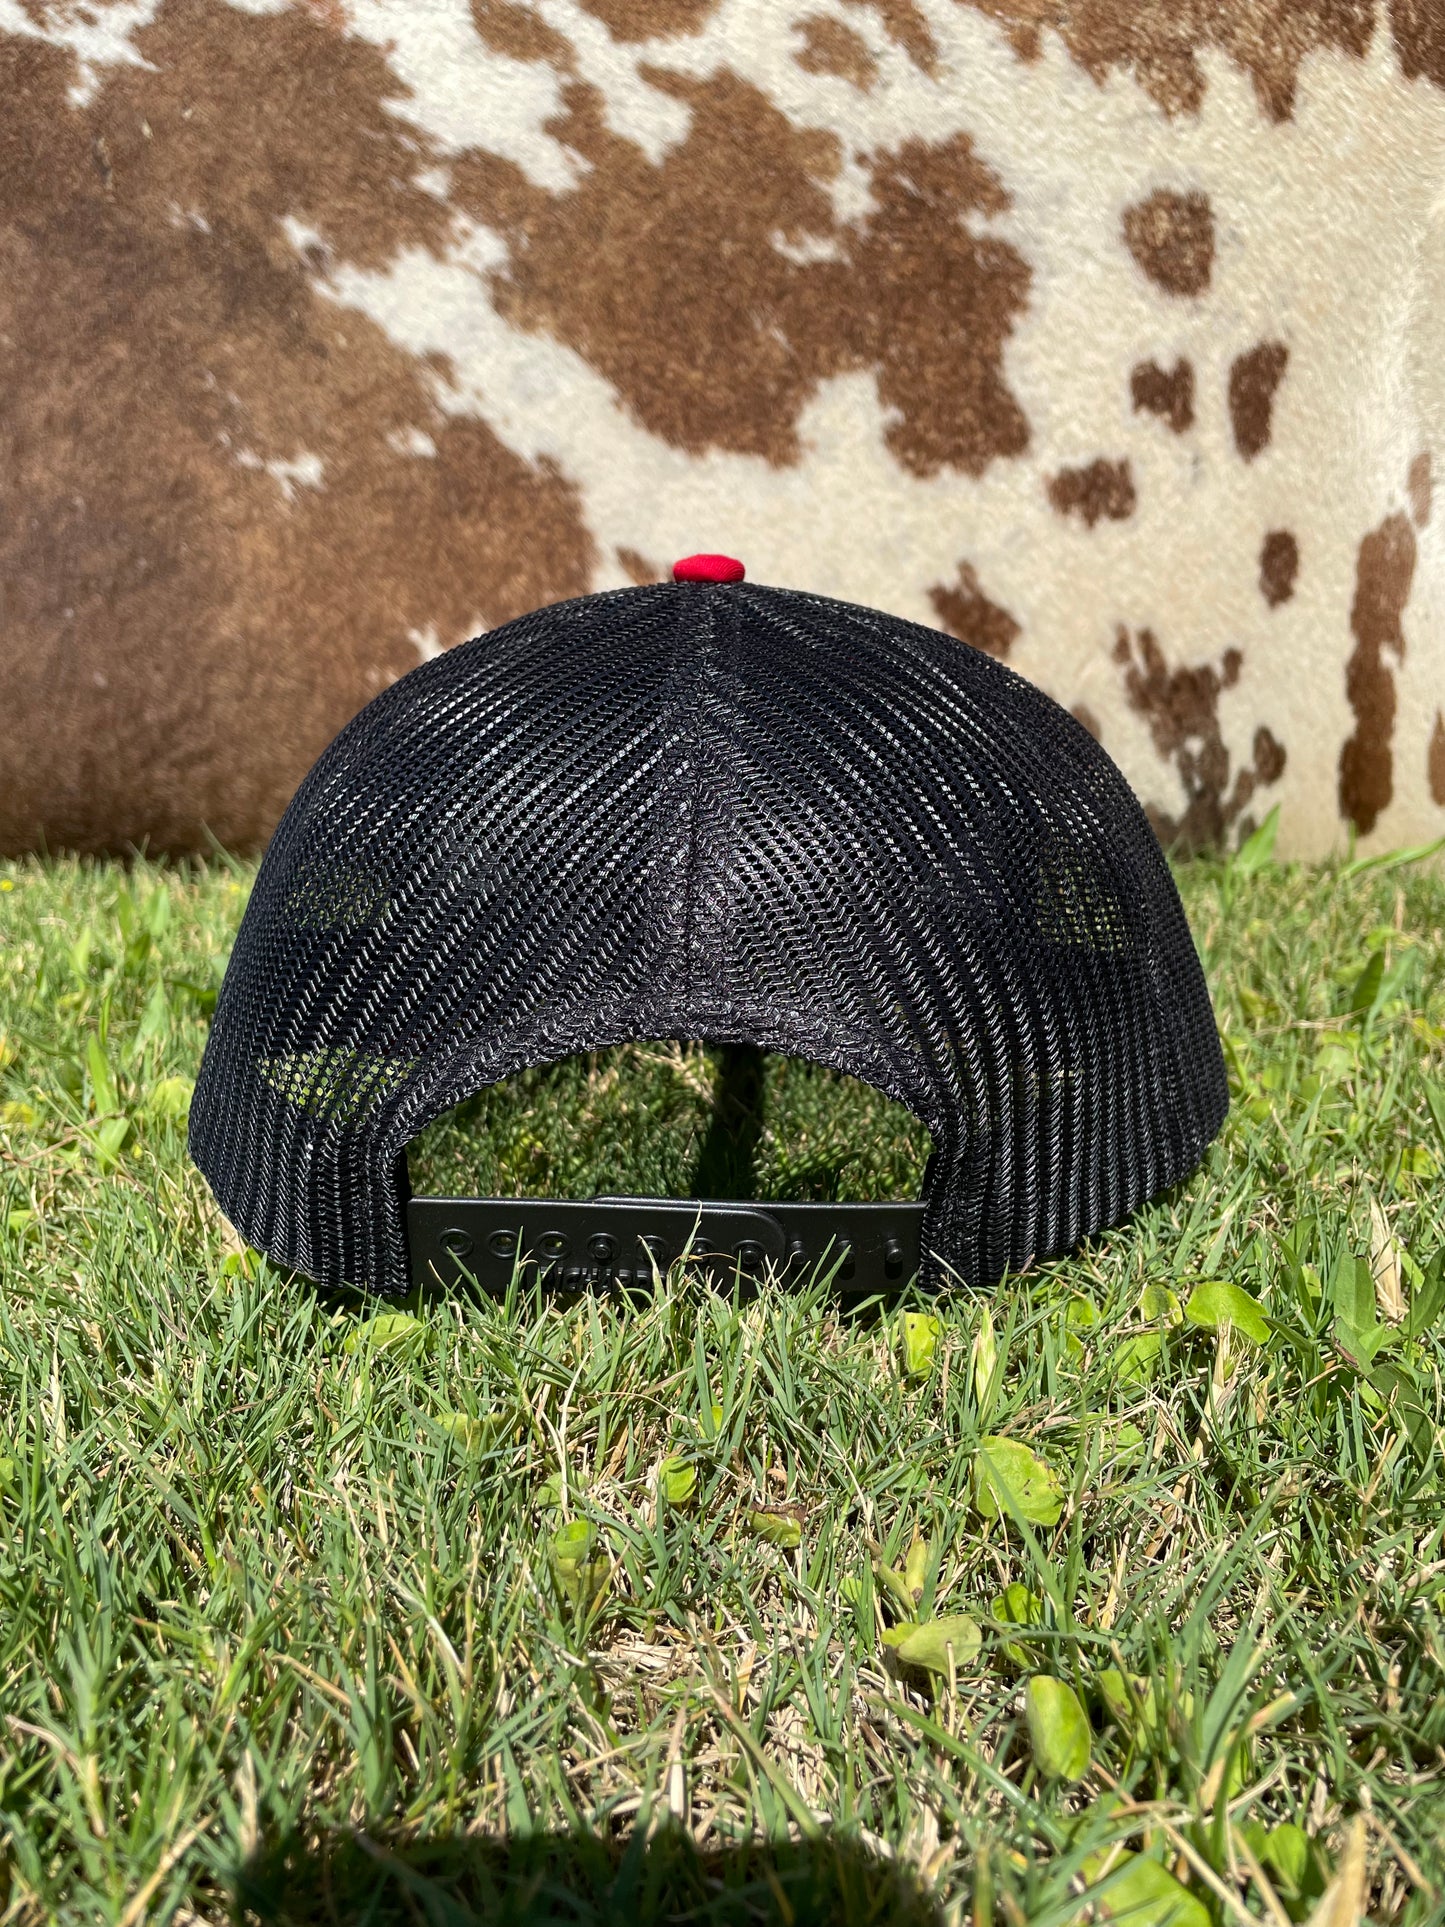 Red and Black trucker Hat